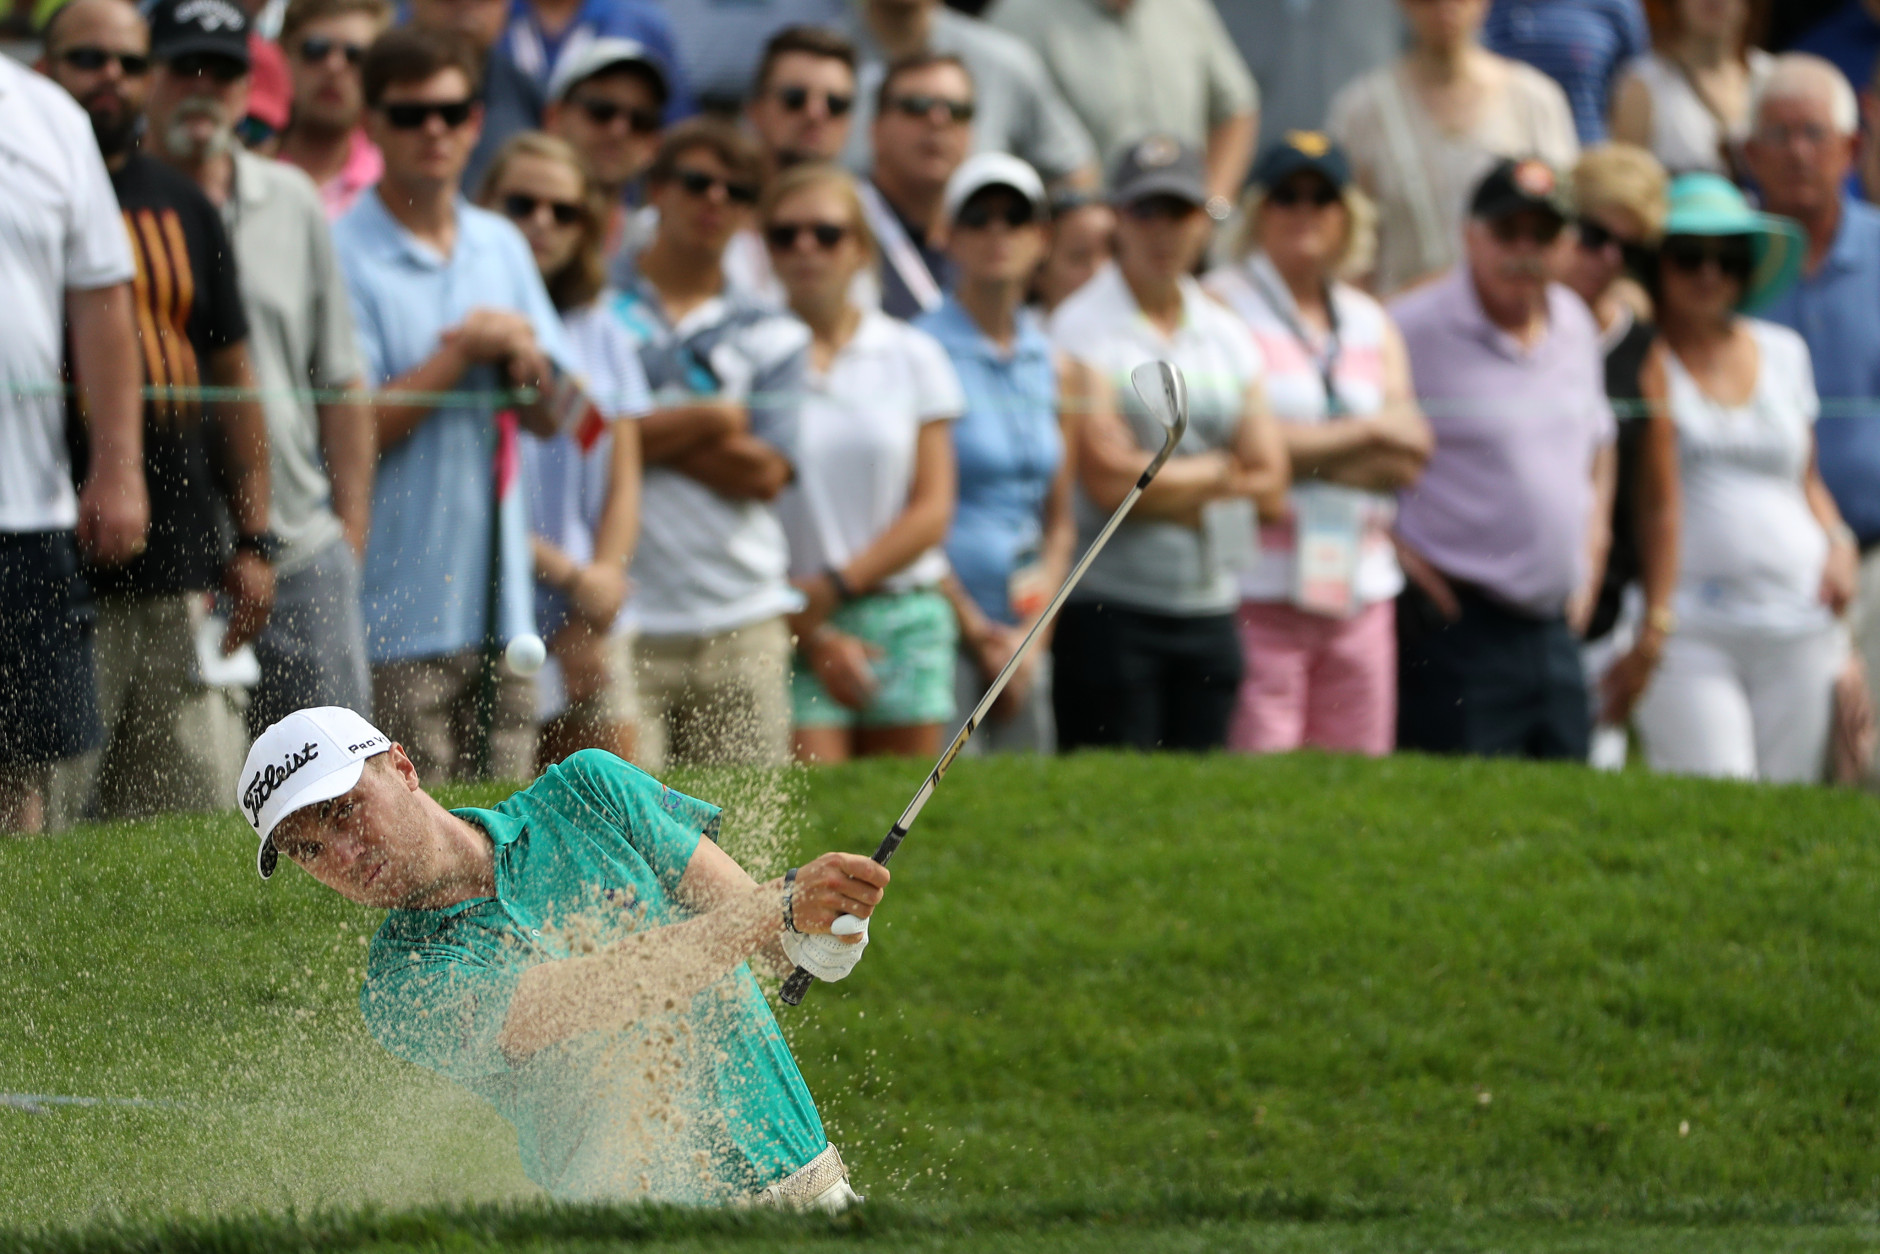 BETHESDA, MD - JUNE 24:  Justin Thomas plays a shot from a bunker on the 14th hole during the second round of the Quicken Loans National at Congressional Country Club on June 24, 2016 in Bethesda, Maryland.  (Photo by Patrick Smith/Getty Images)